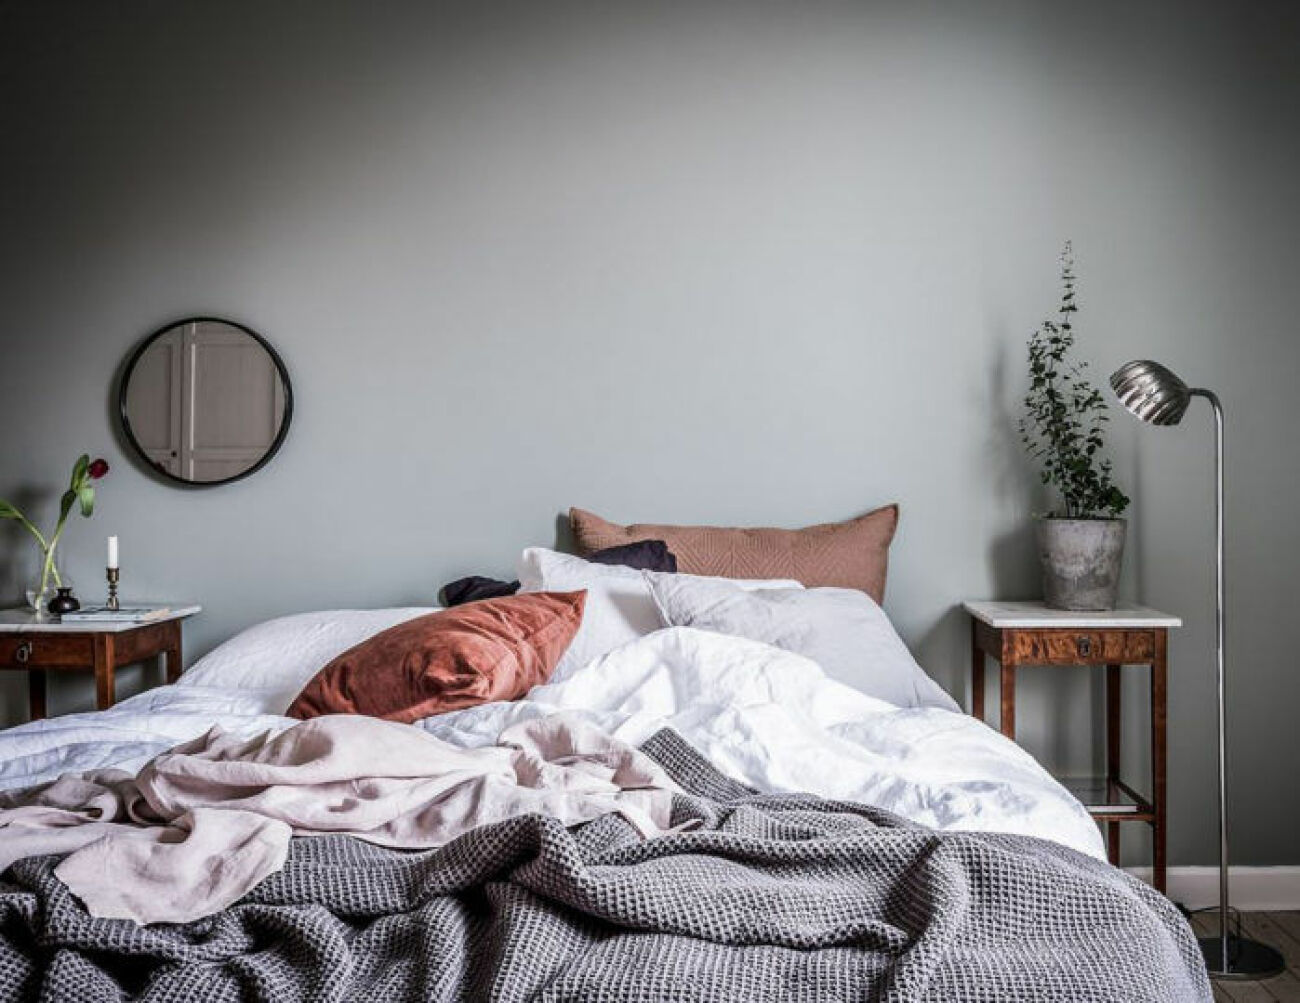 Bedroom with grey painted walls, cozy bedding and round mirror. Scandinavian decoration and ideas.